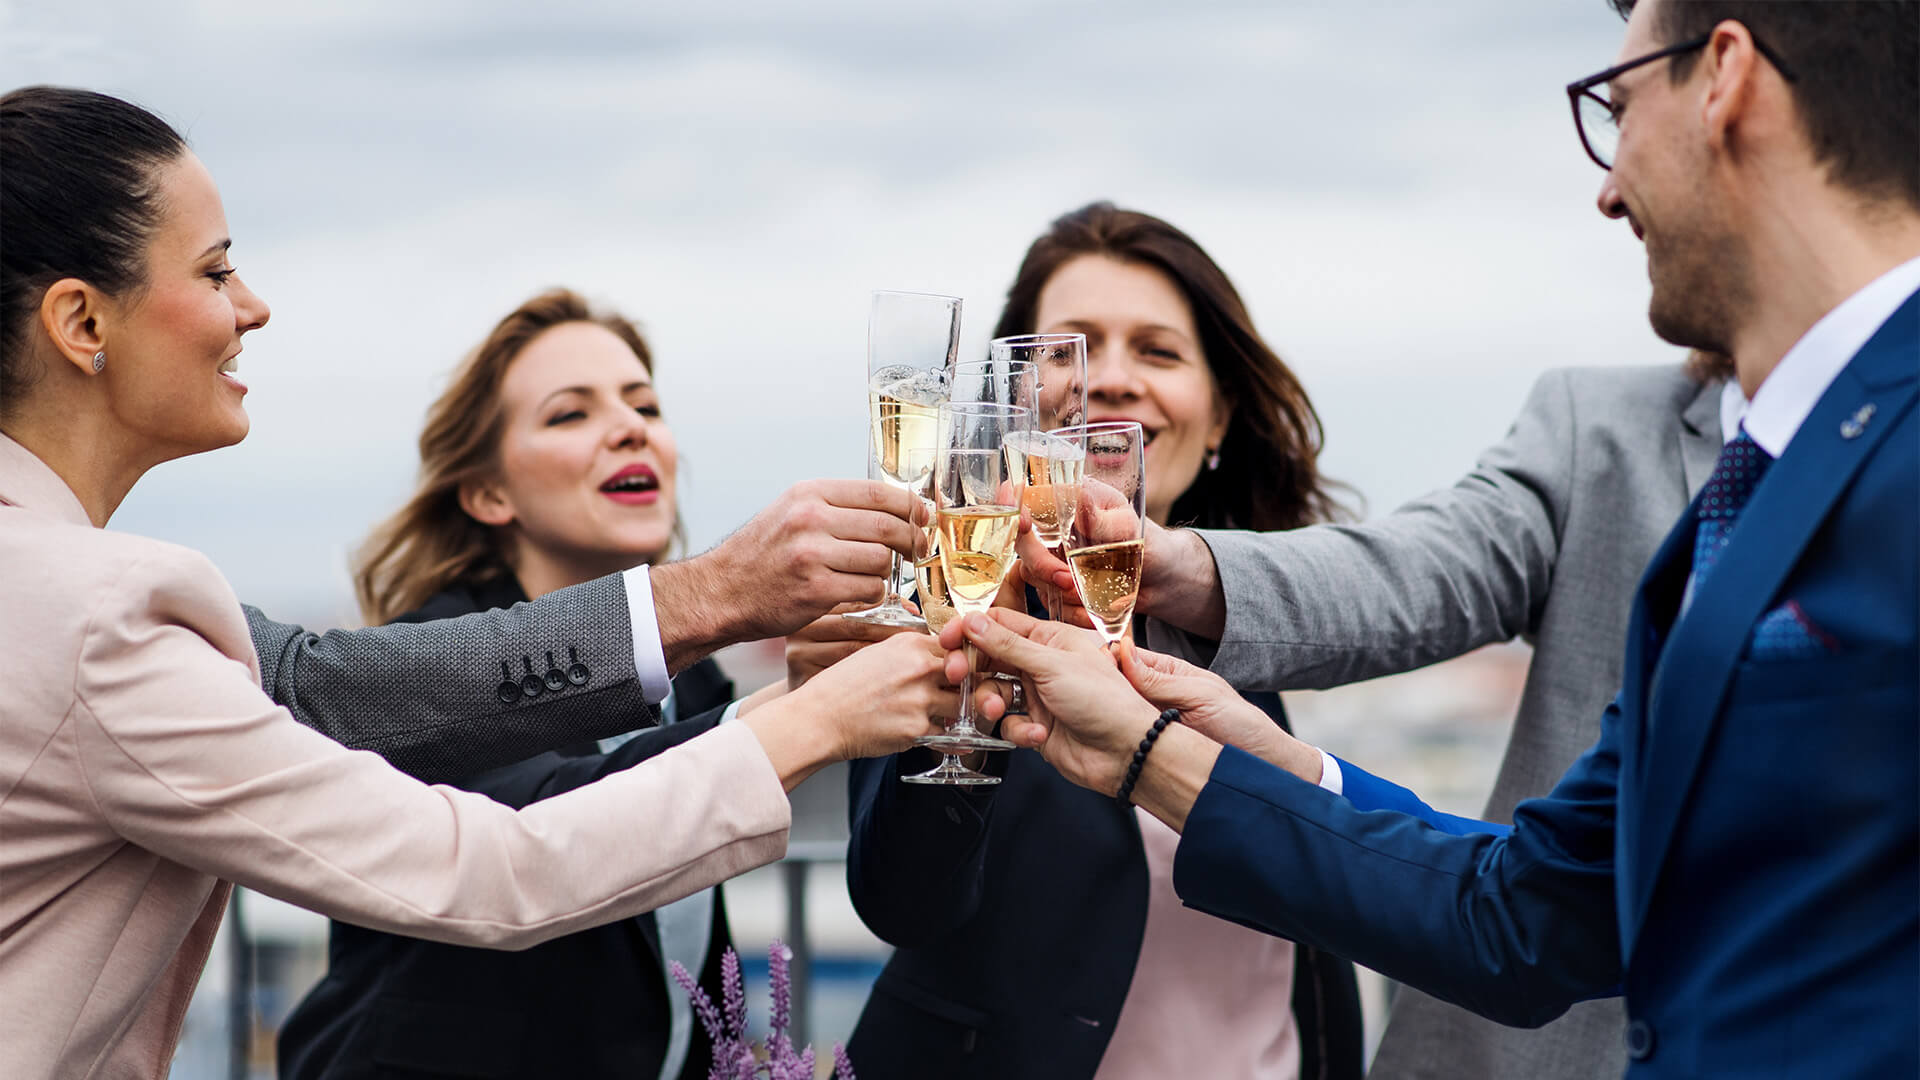 Corporate Celebrations: Why Hosting Your First Party is Good for Business